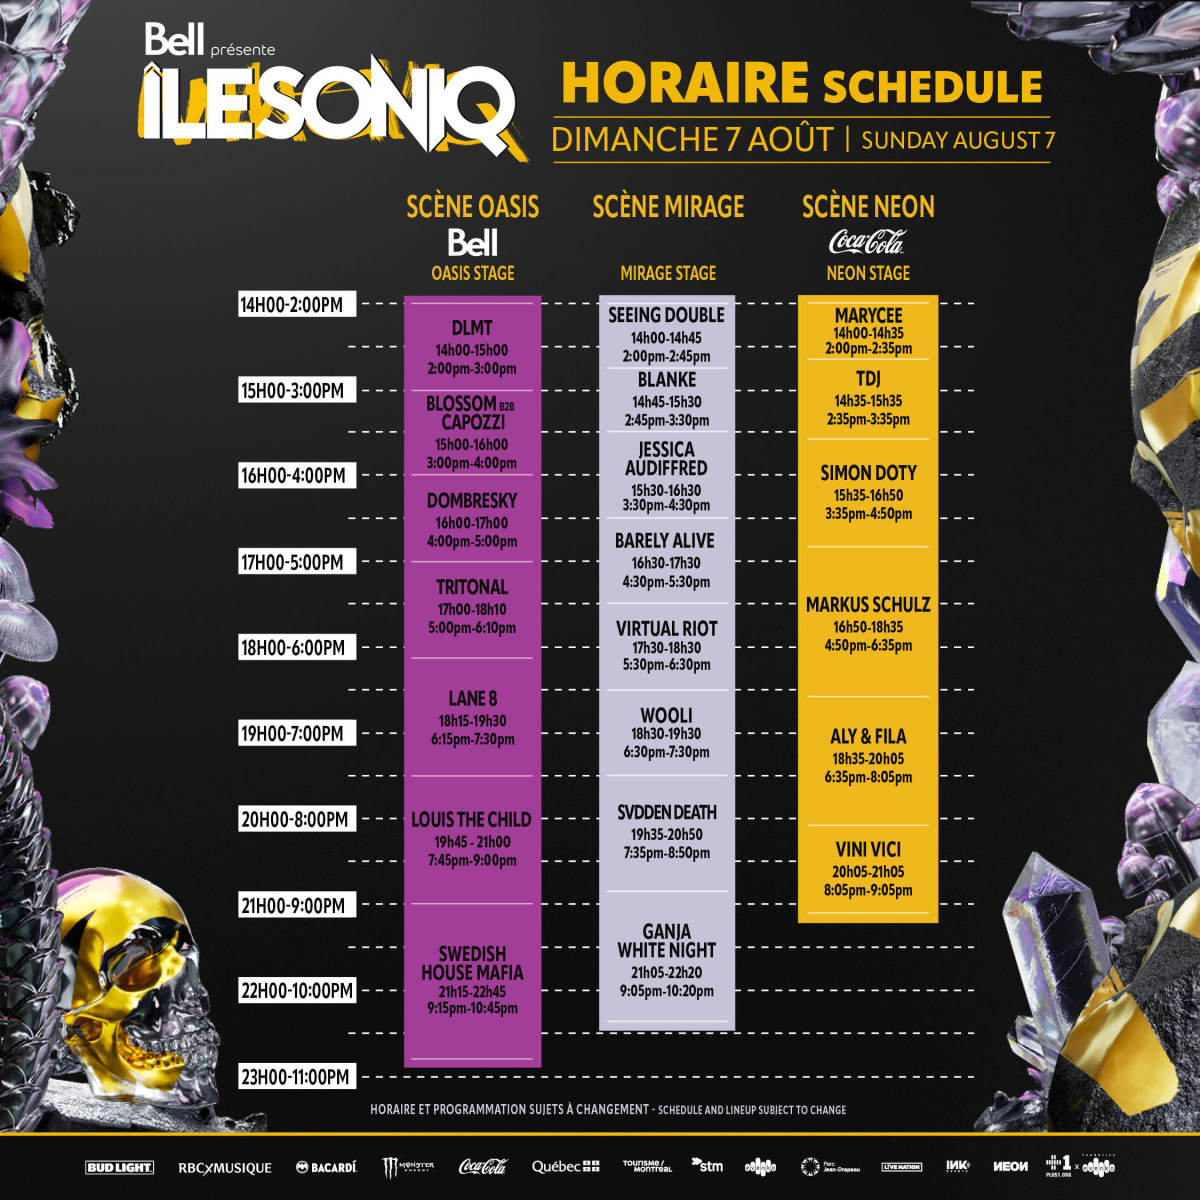 Schedule for August 7th, Day 3 of ÎLESONIQ 2022.